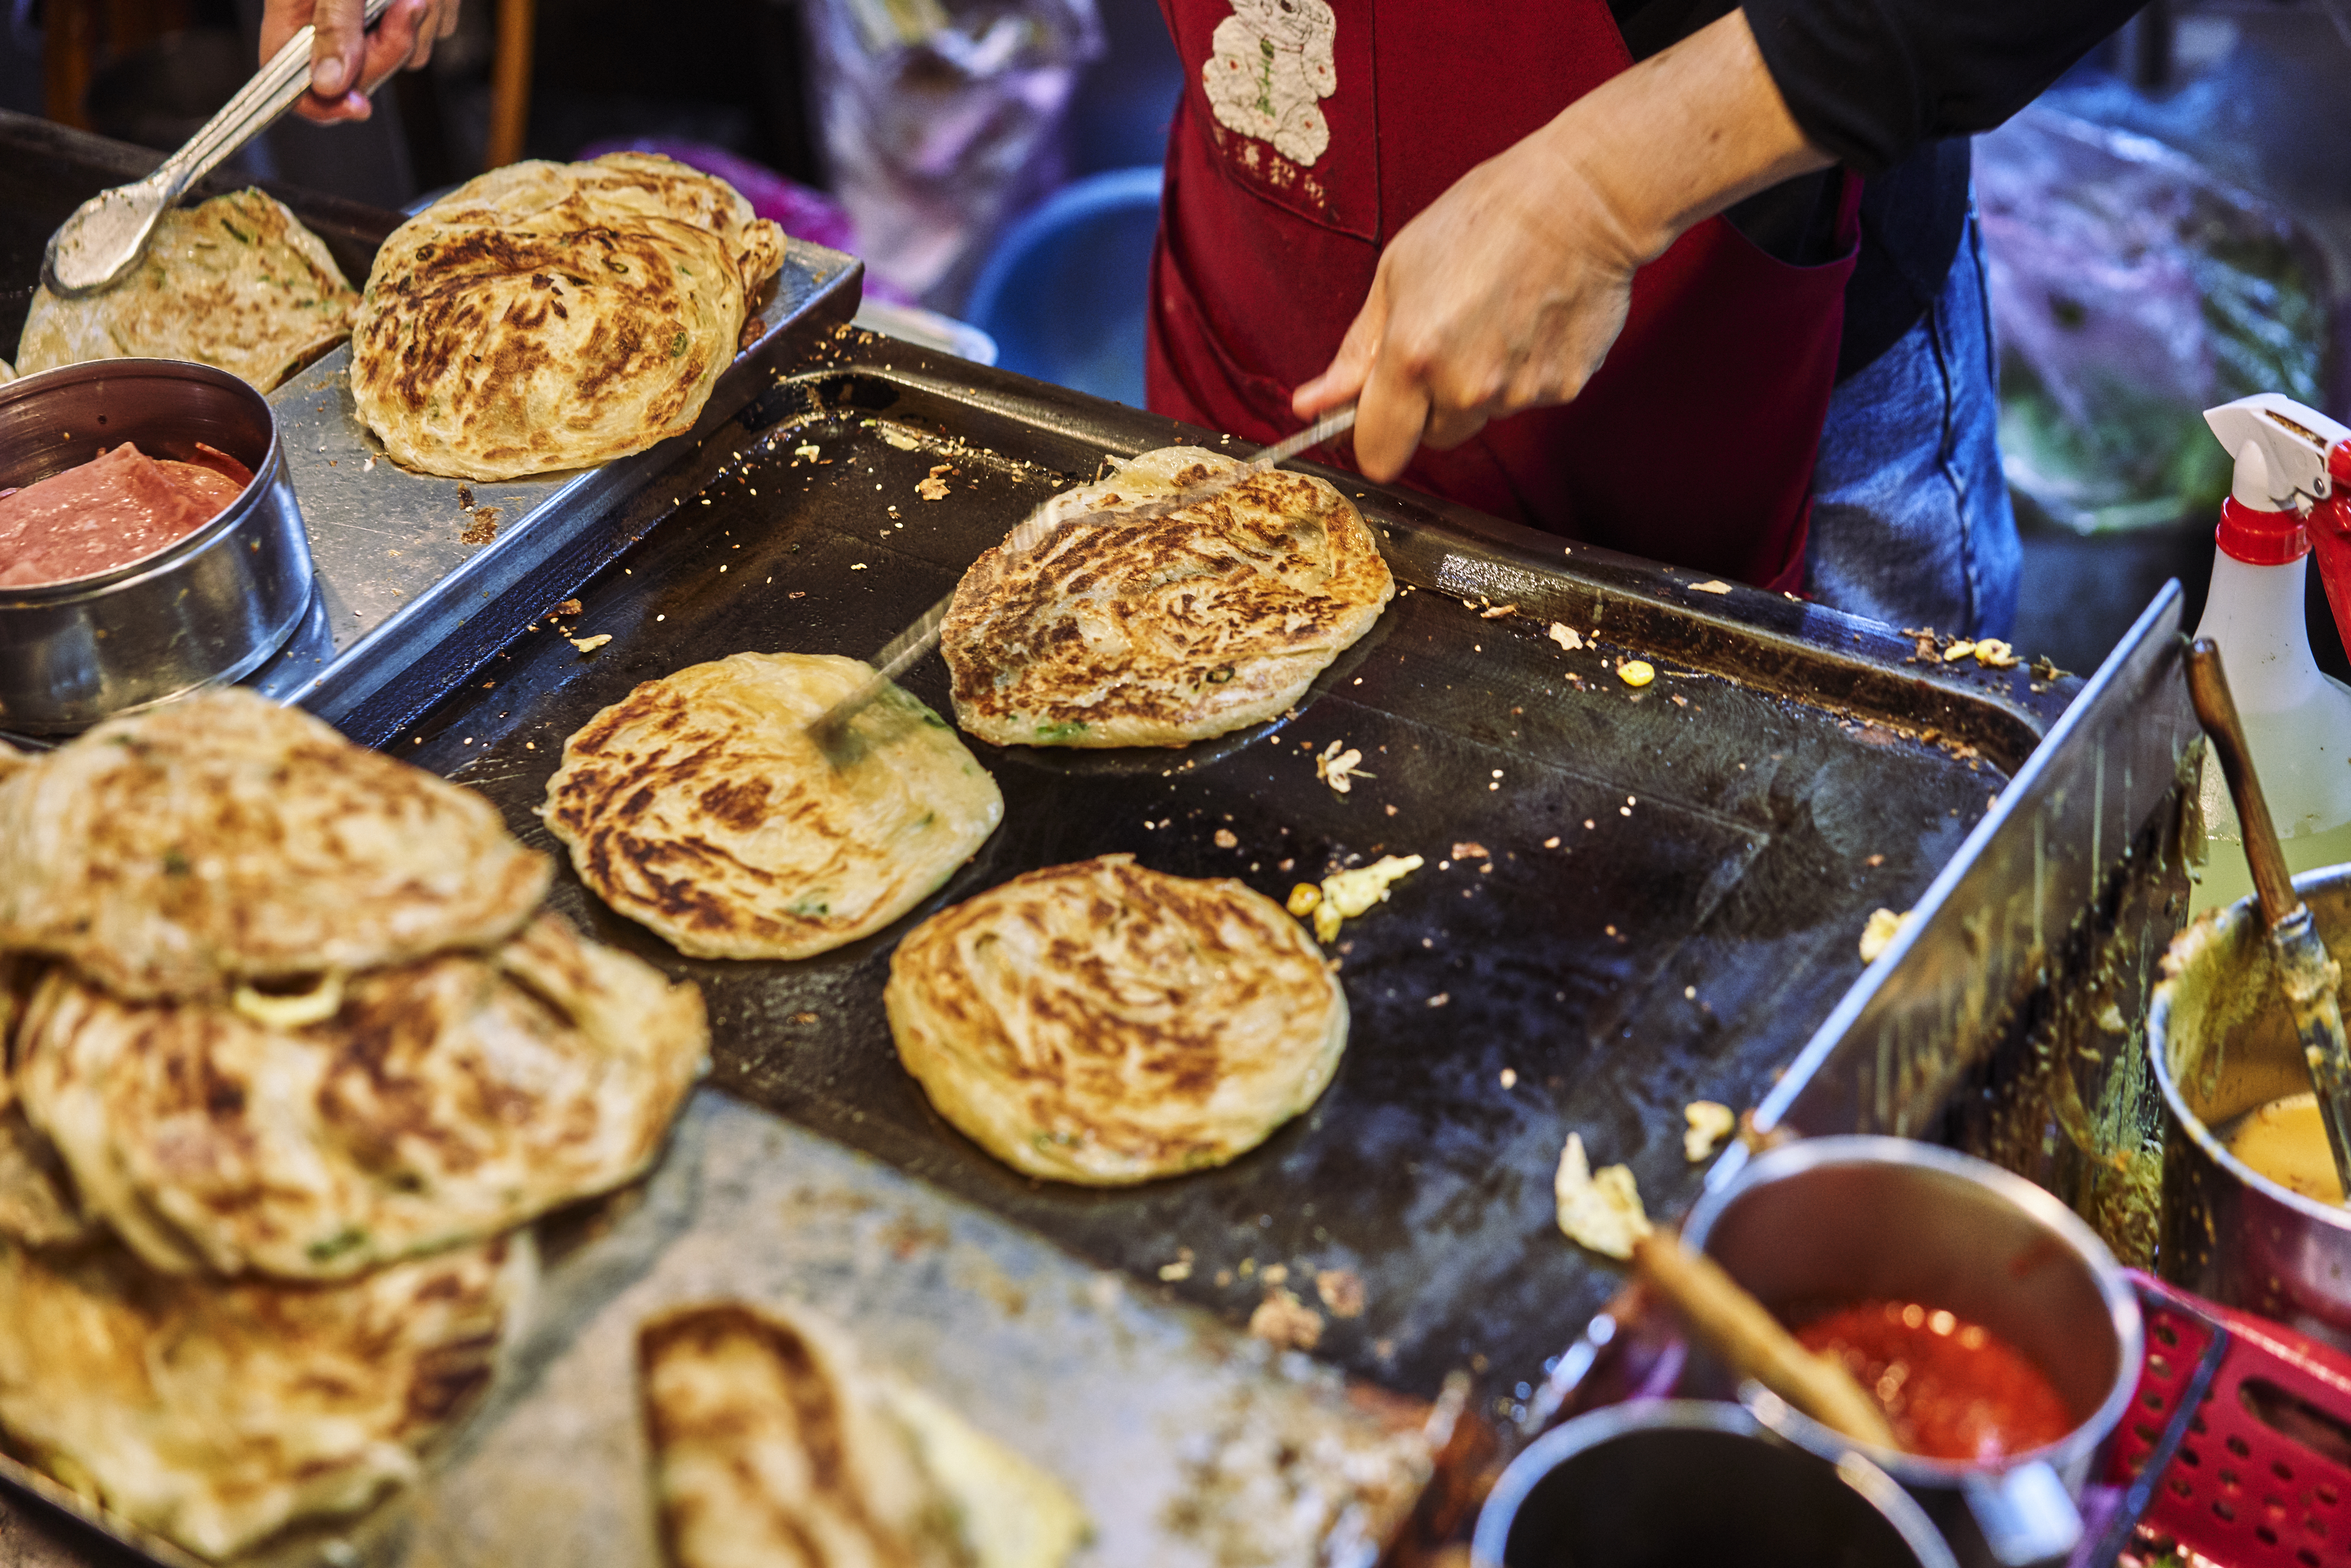 A worker flips scallion pancakes on the griddle at a street food stand.